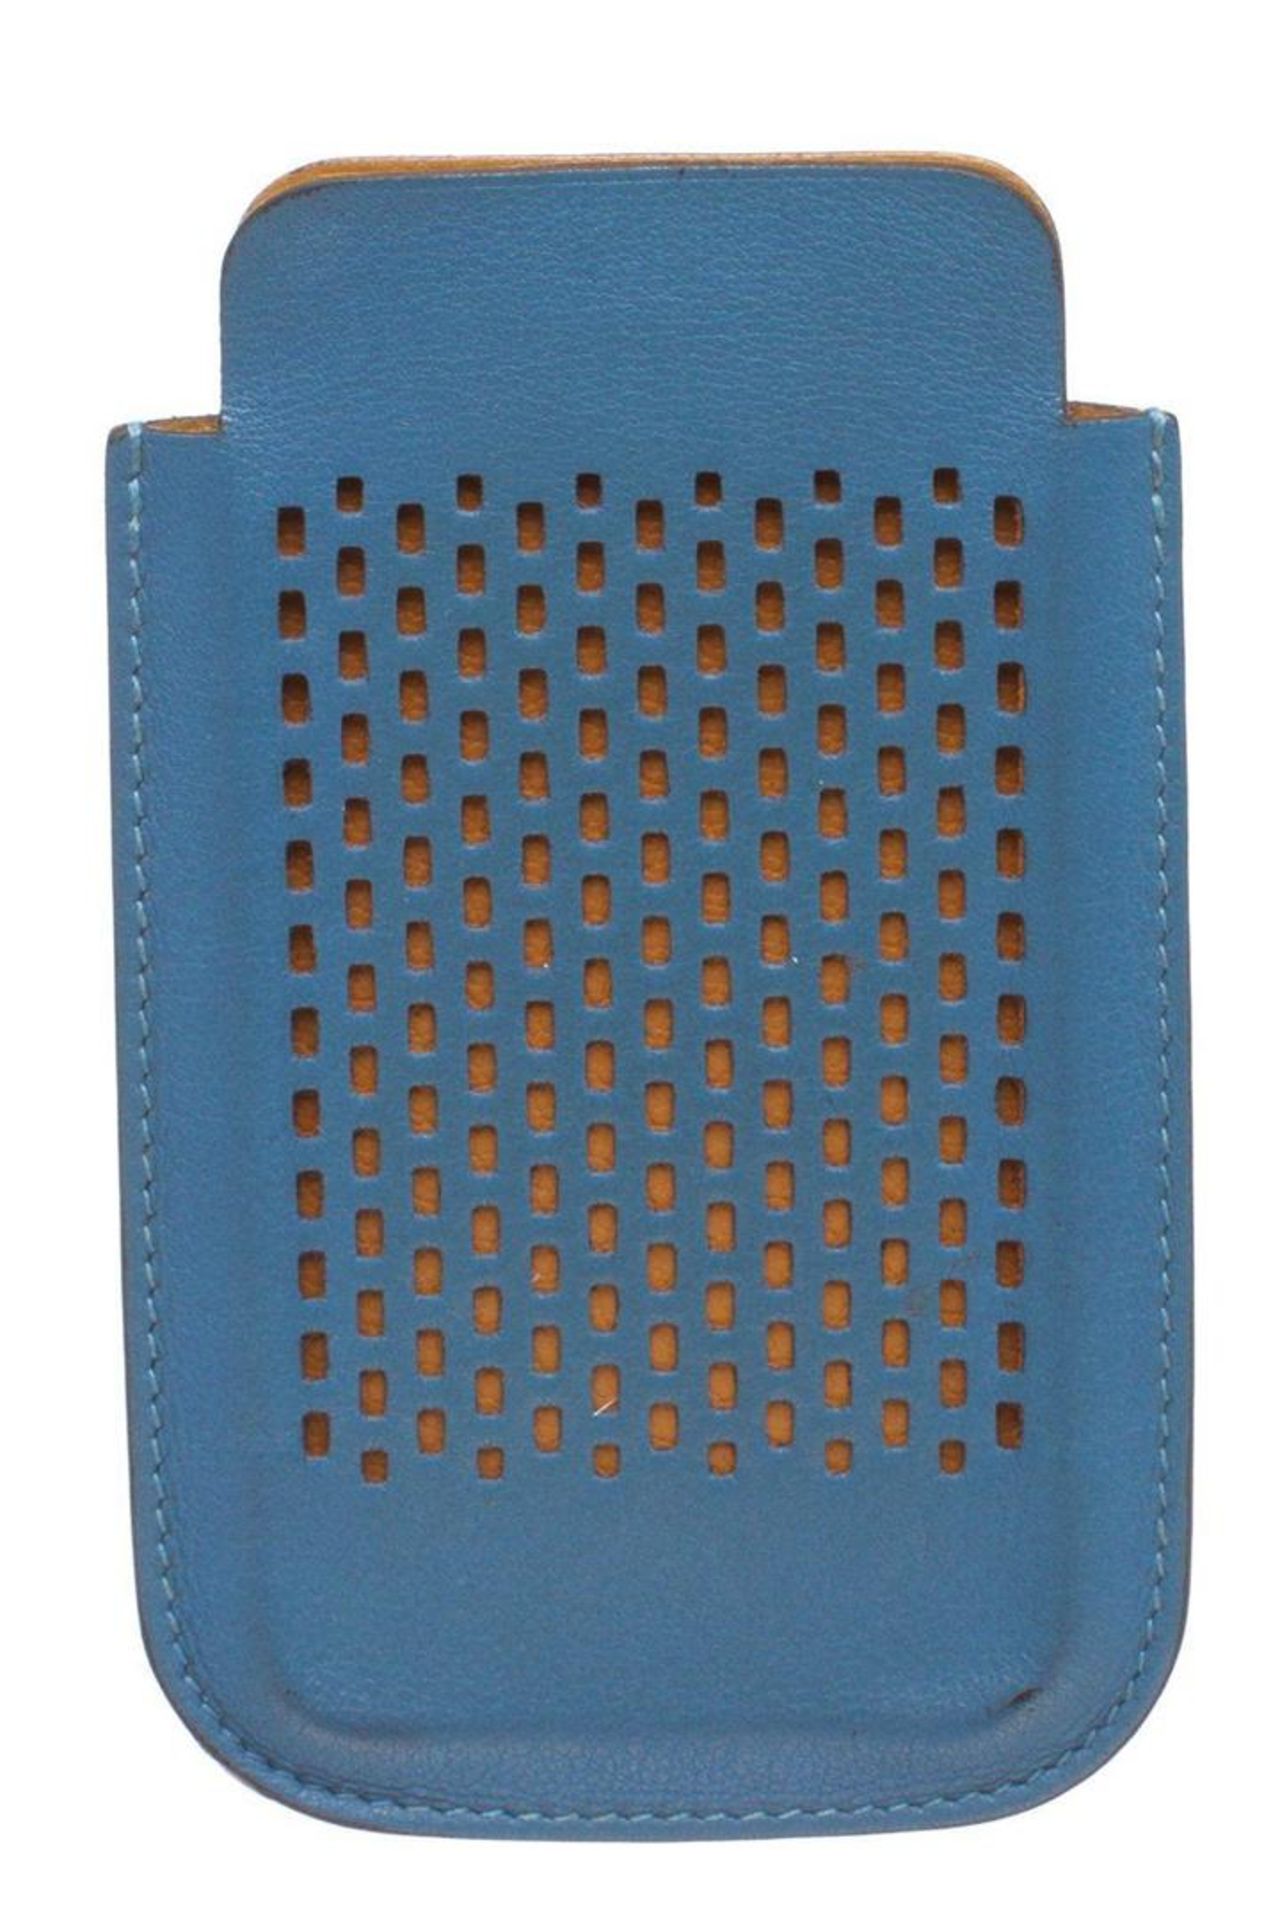 Hermes Blue Perforated Leather iPhone 4 Case